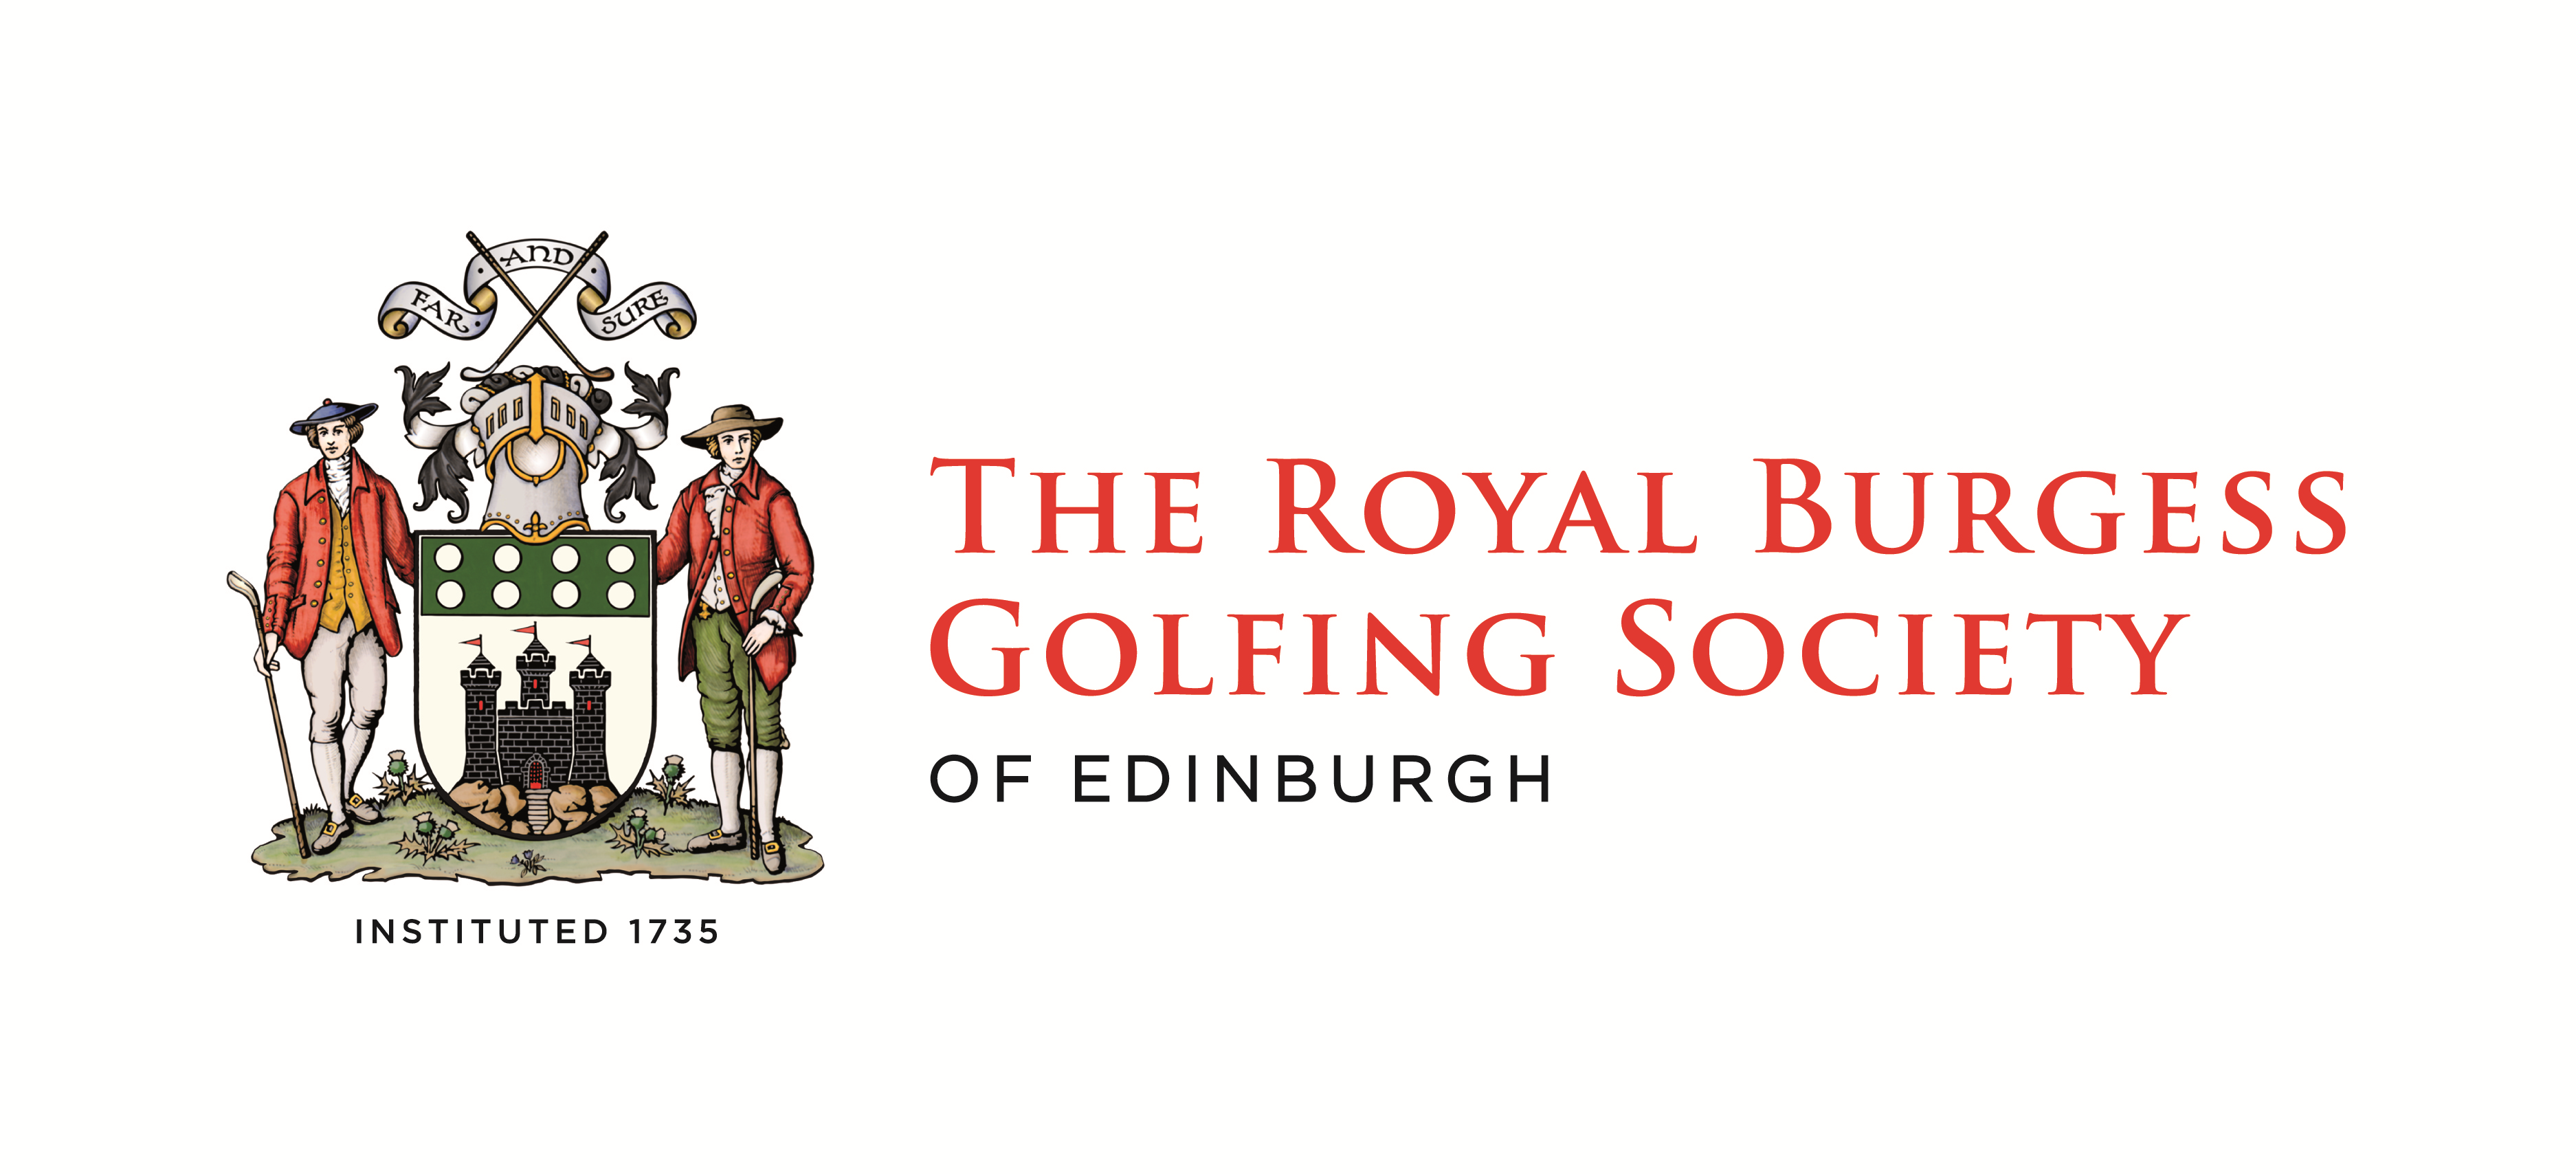 The world's oldest golf club finally accepts women as members